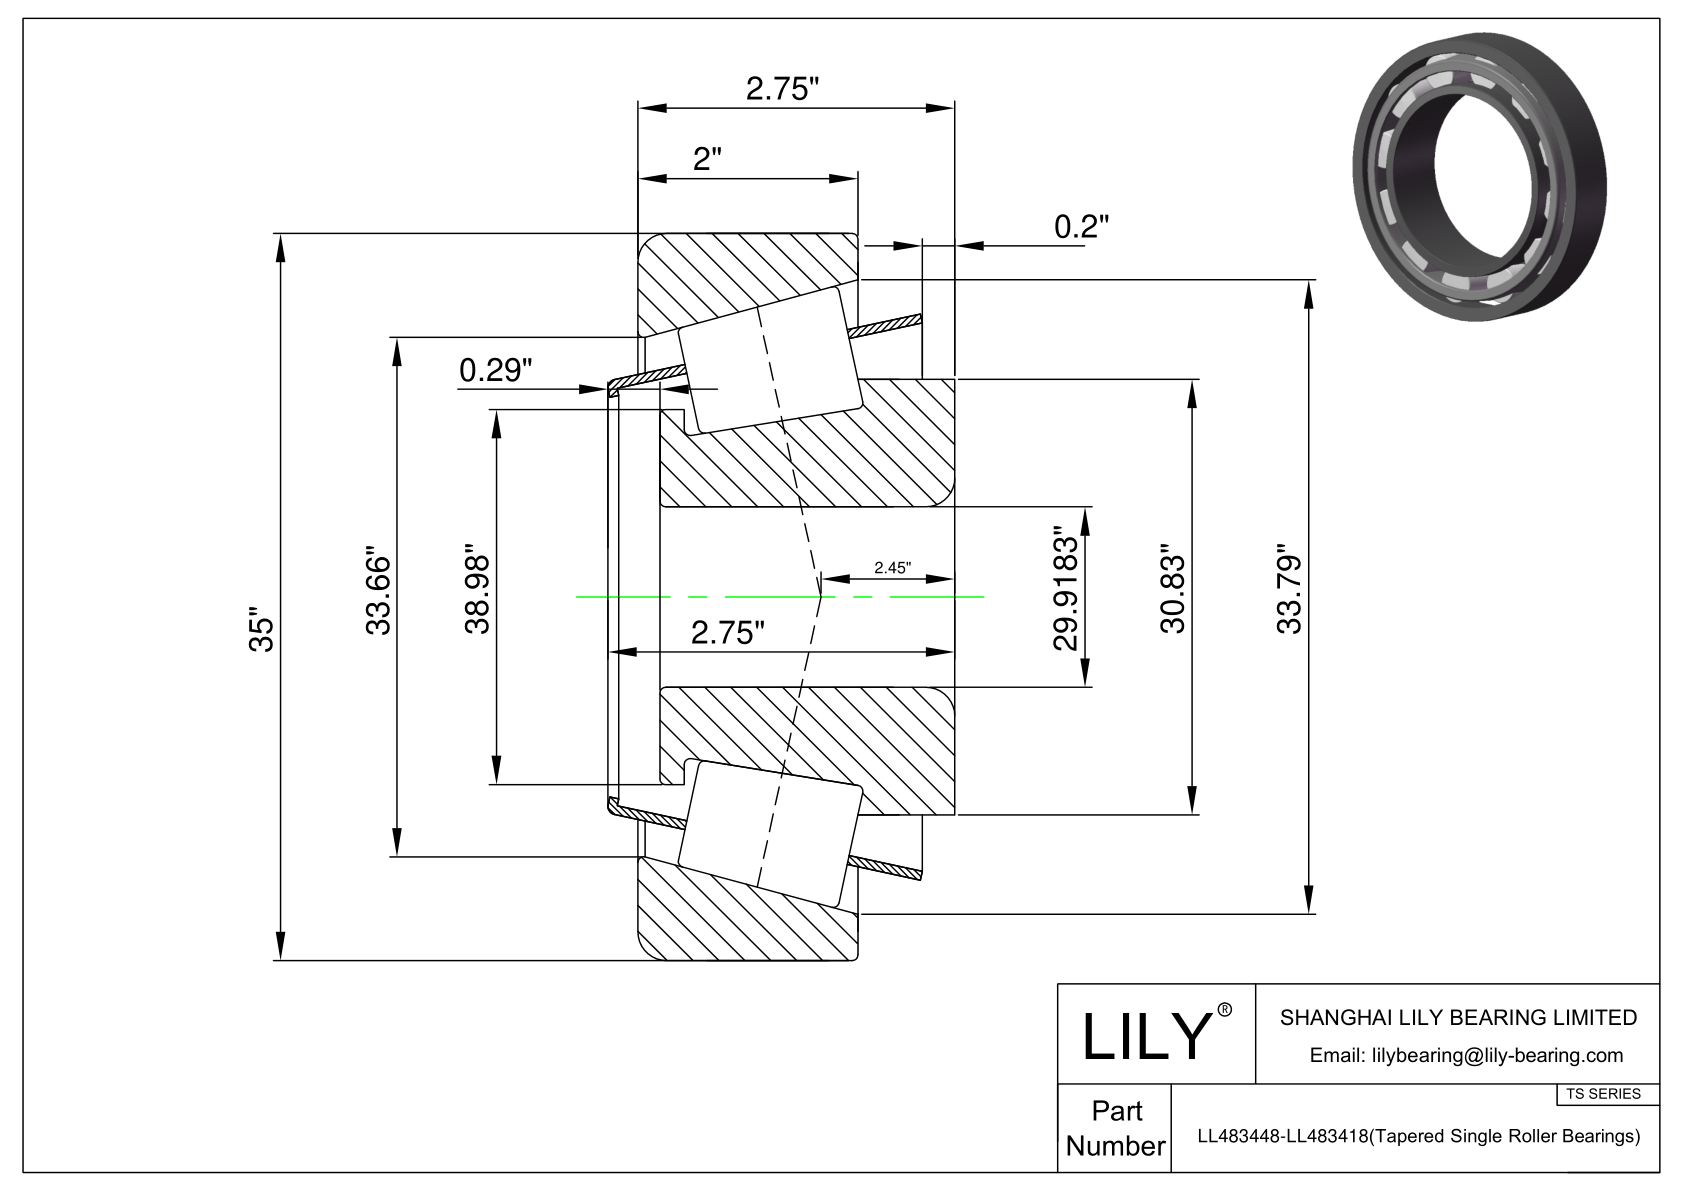 LL483448-LL483418 TS (Tapered Single Roller Bearings) (Imperial) cad drawing